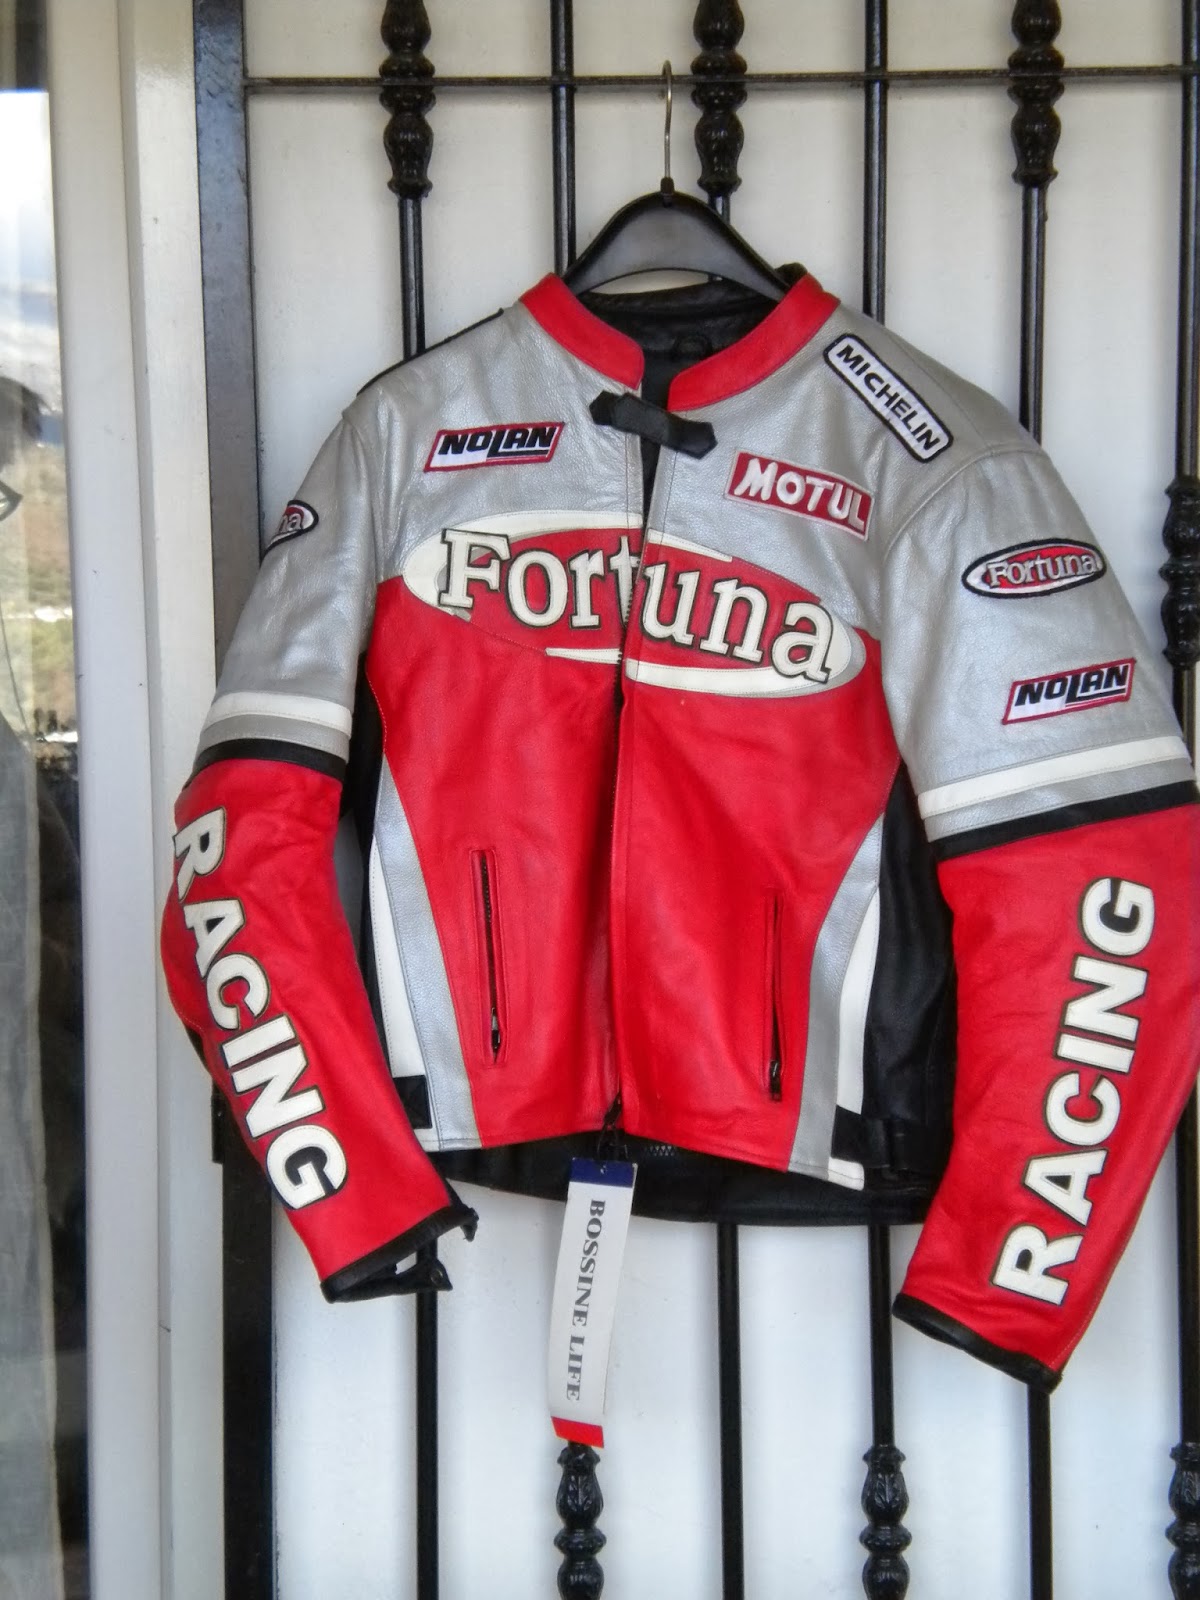 Digame: For Sale Racing Bike Leather Jacket